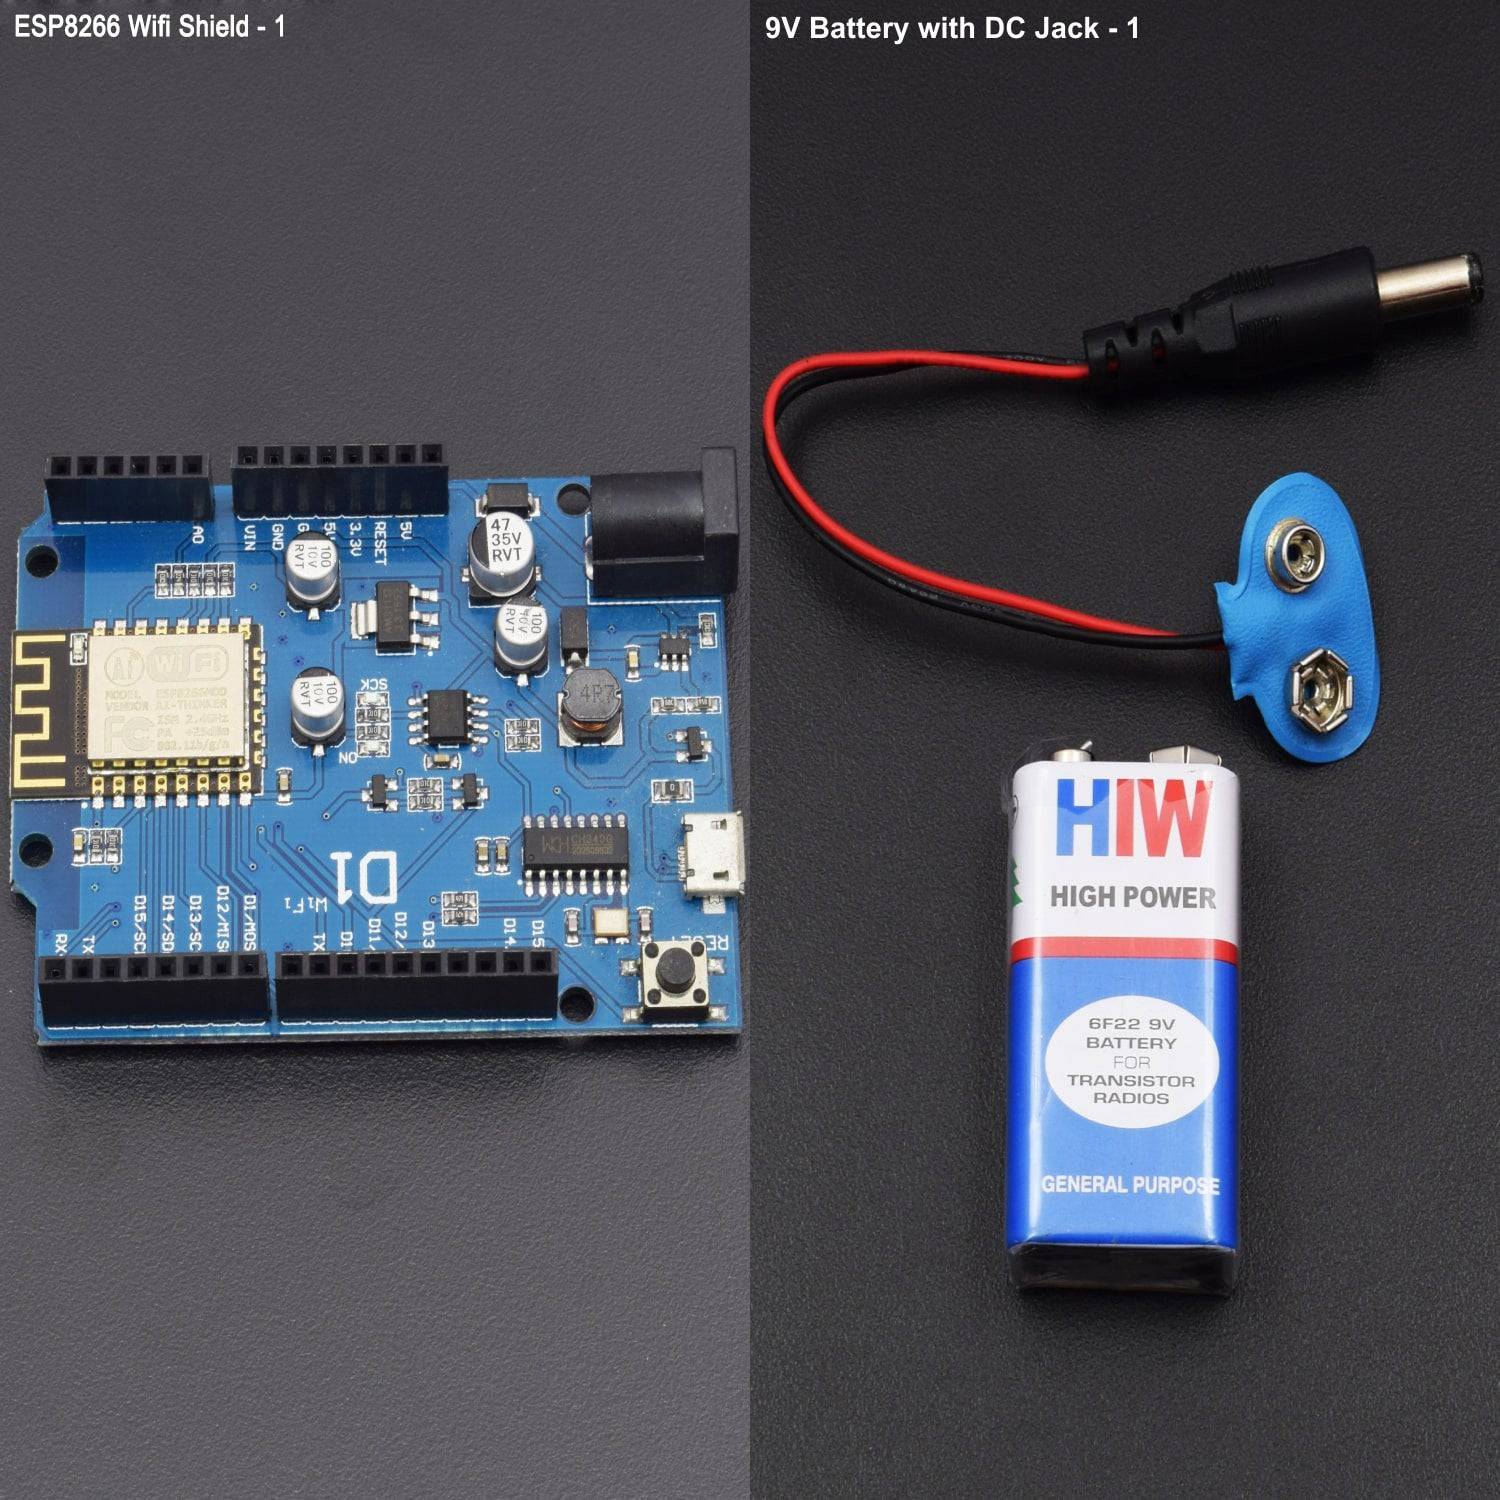 How to install and configure ESP8266 Wi-Fi shield - KT812 - REES52